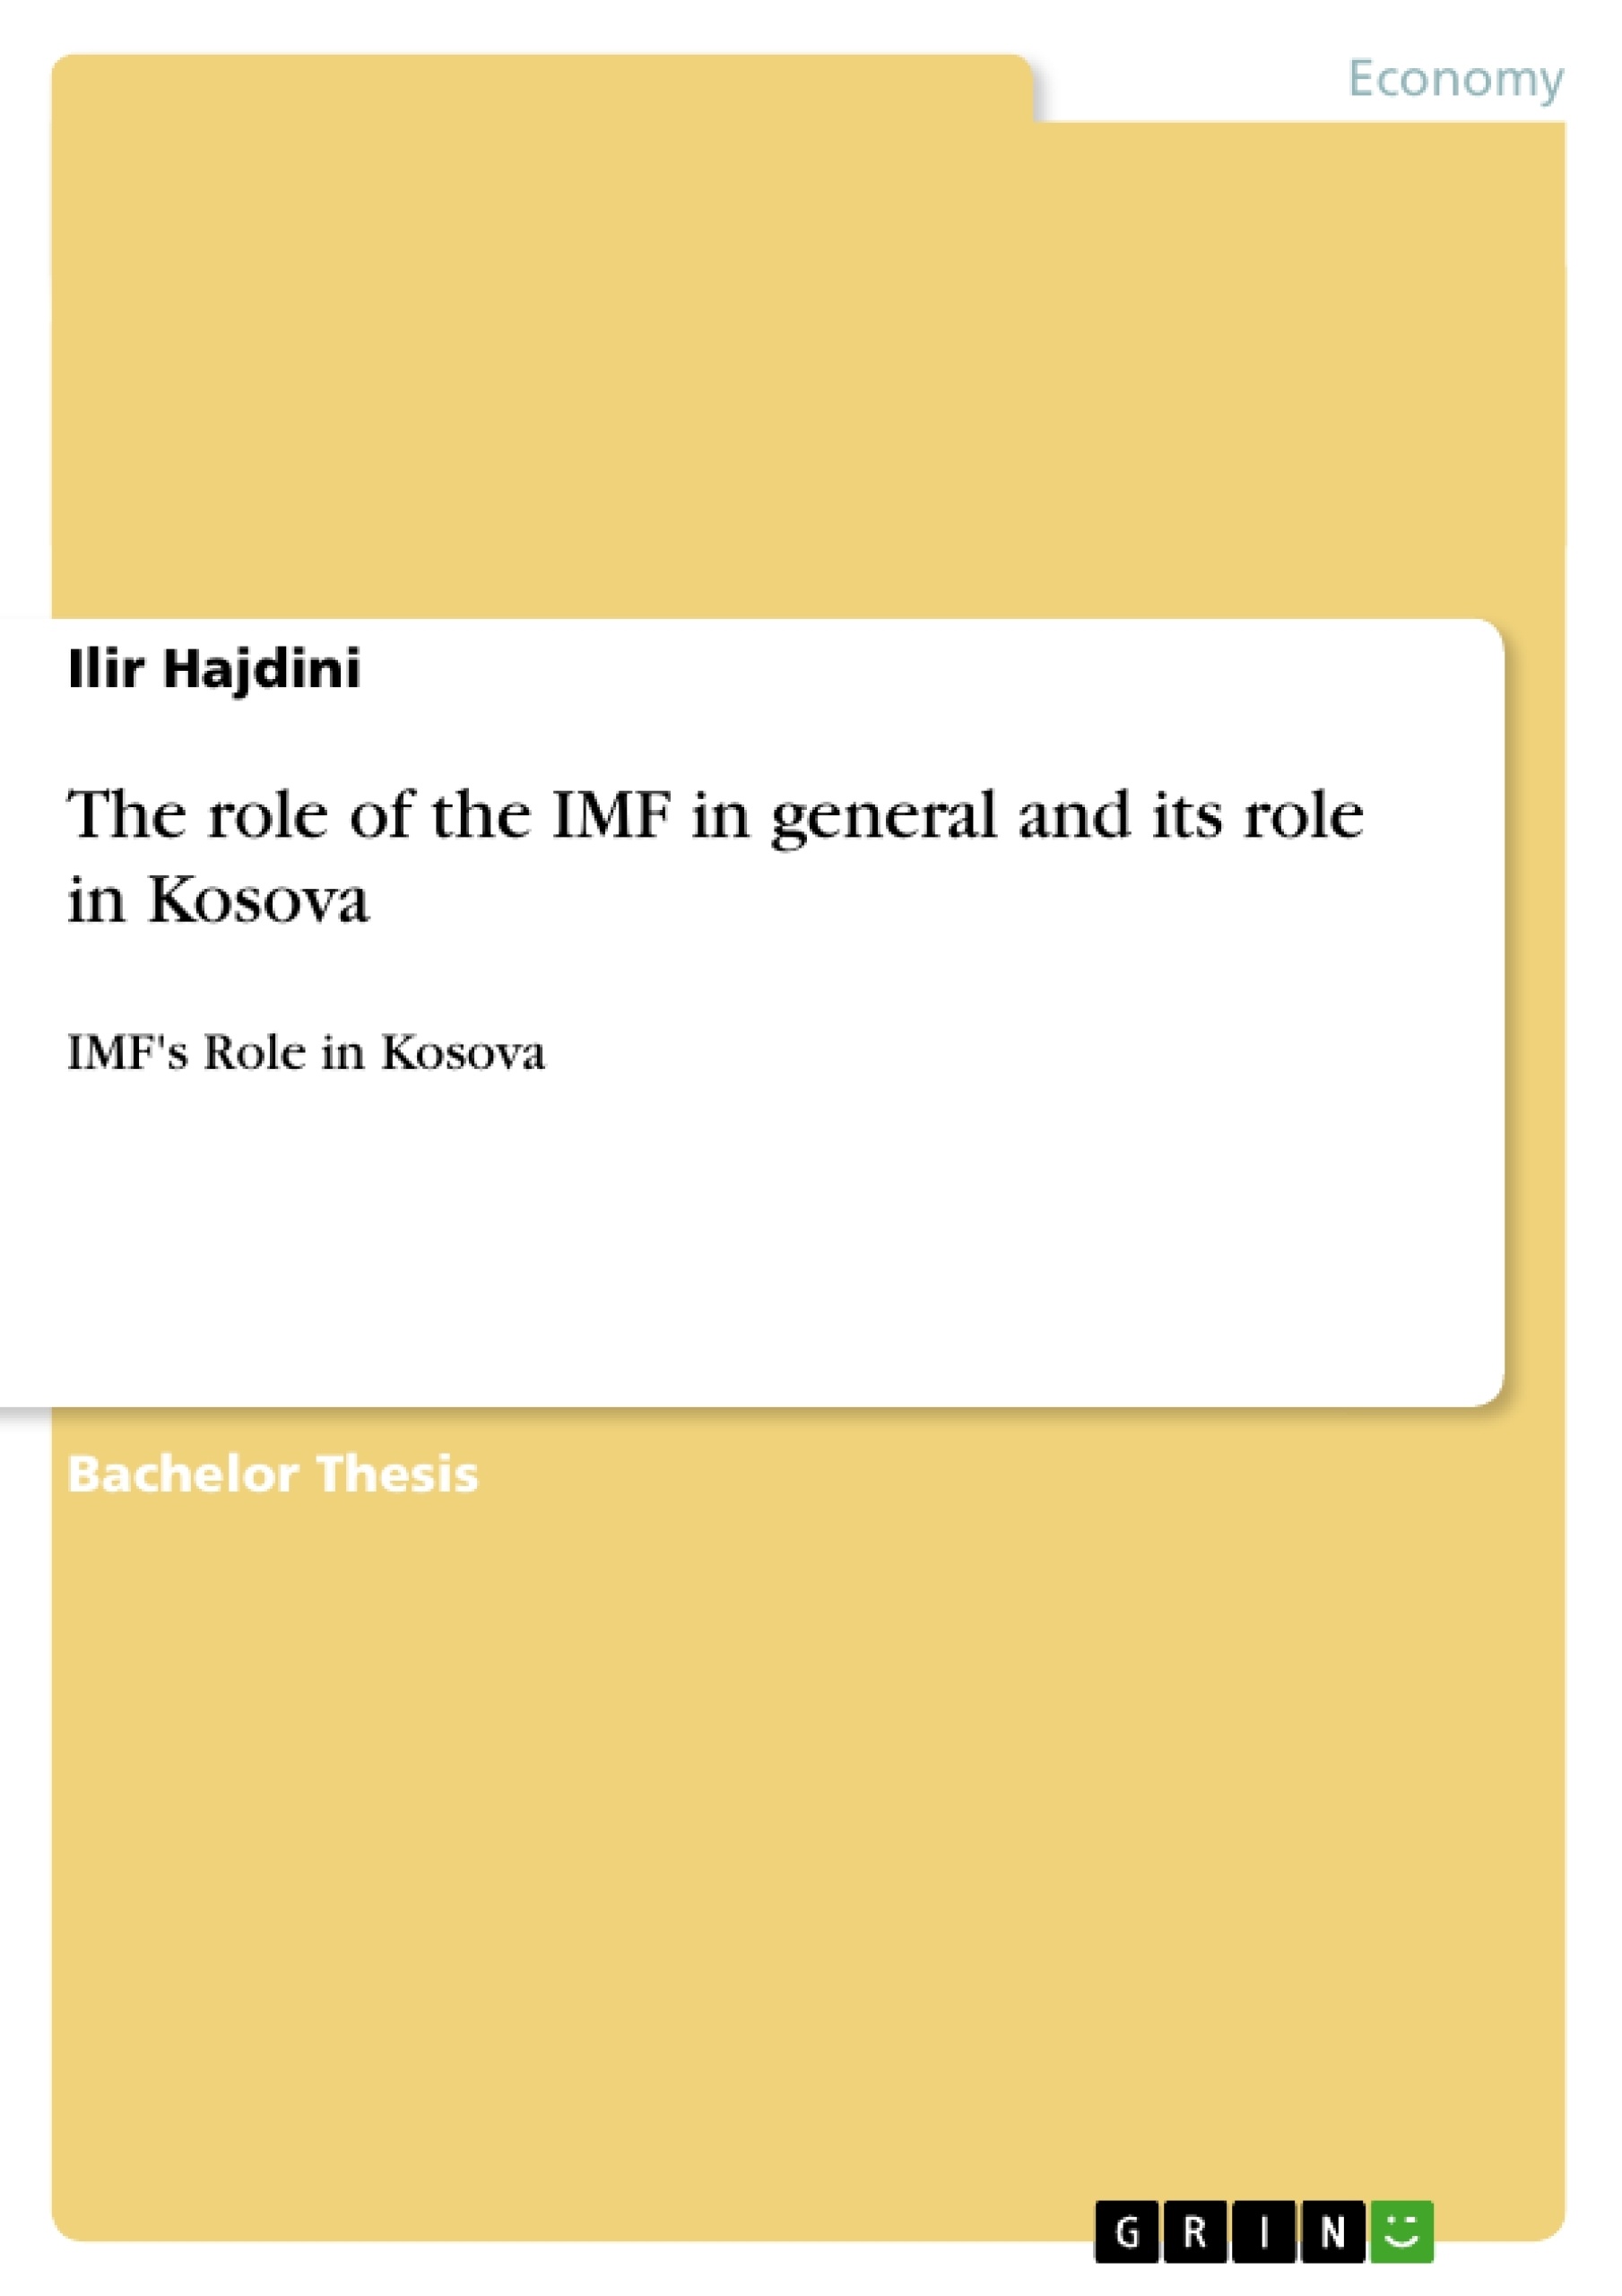 Titre: The role of the IMF in general and its role in Kosova 